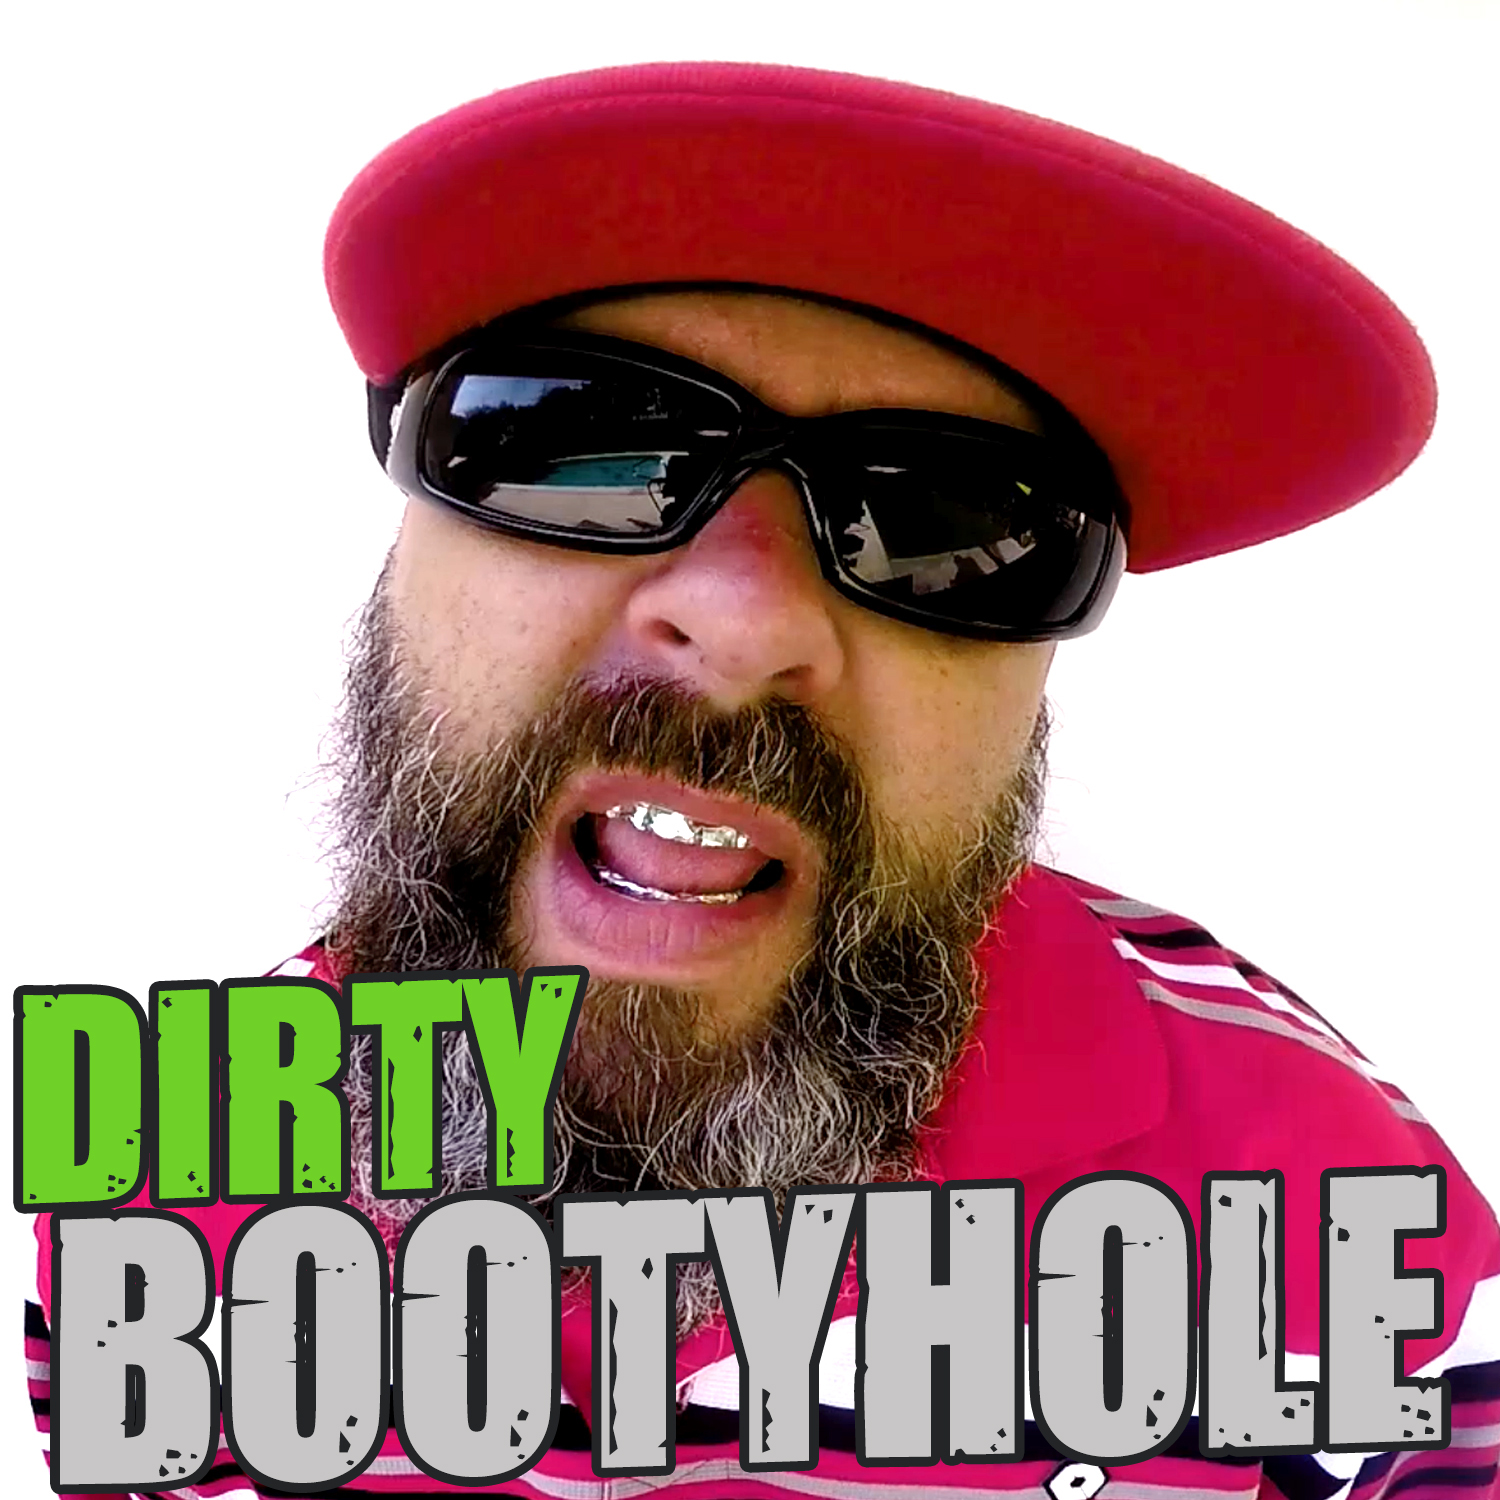 cole helberg recommends Booty Hole Pics